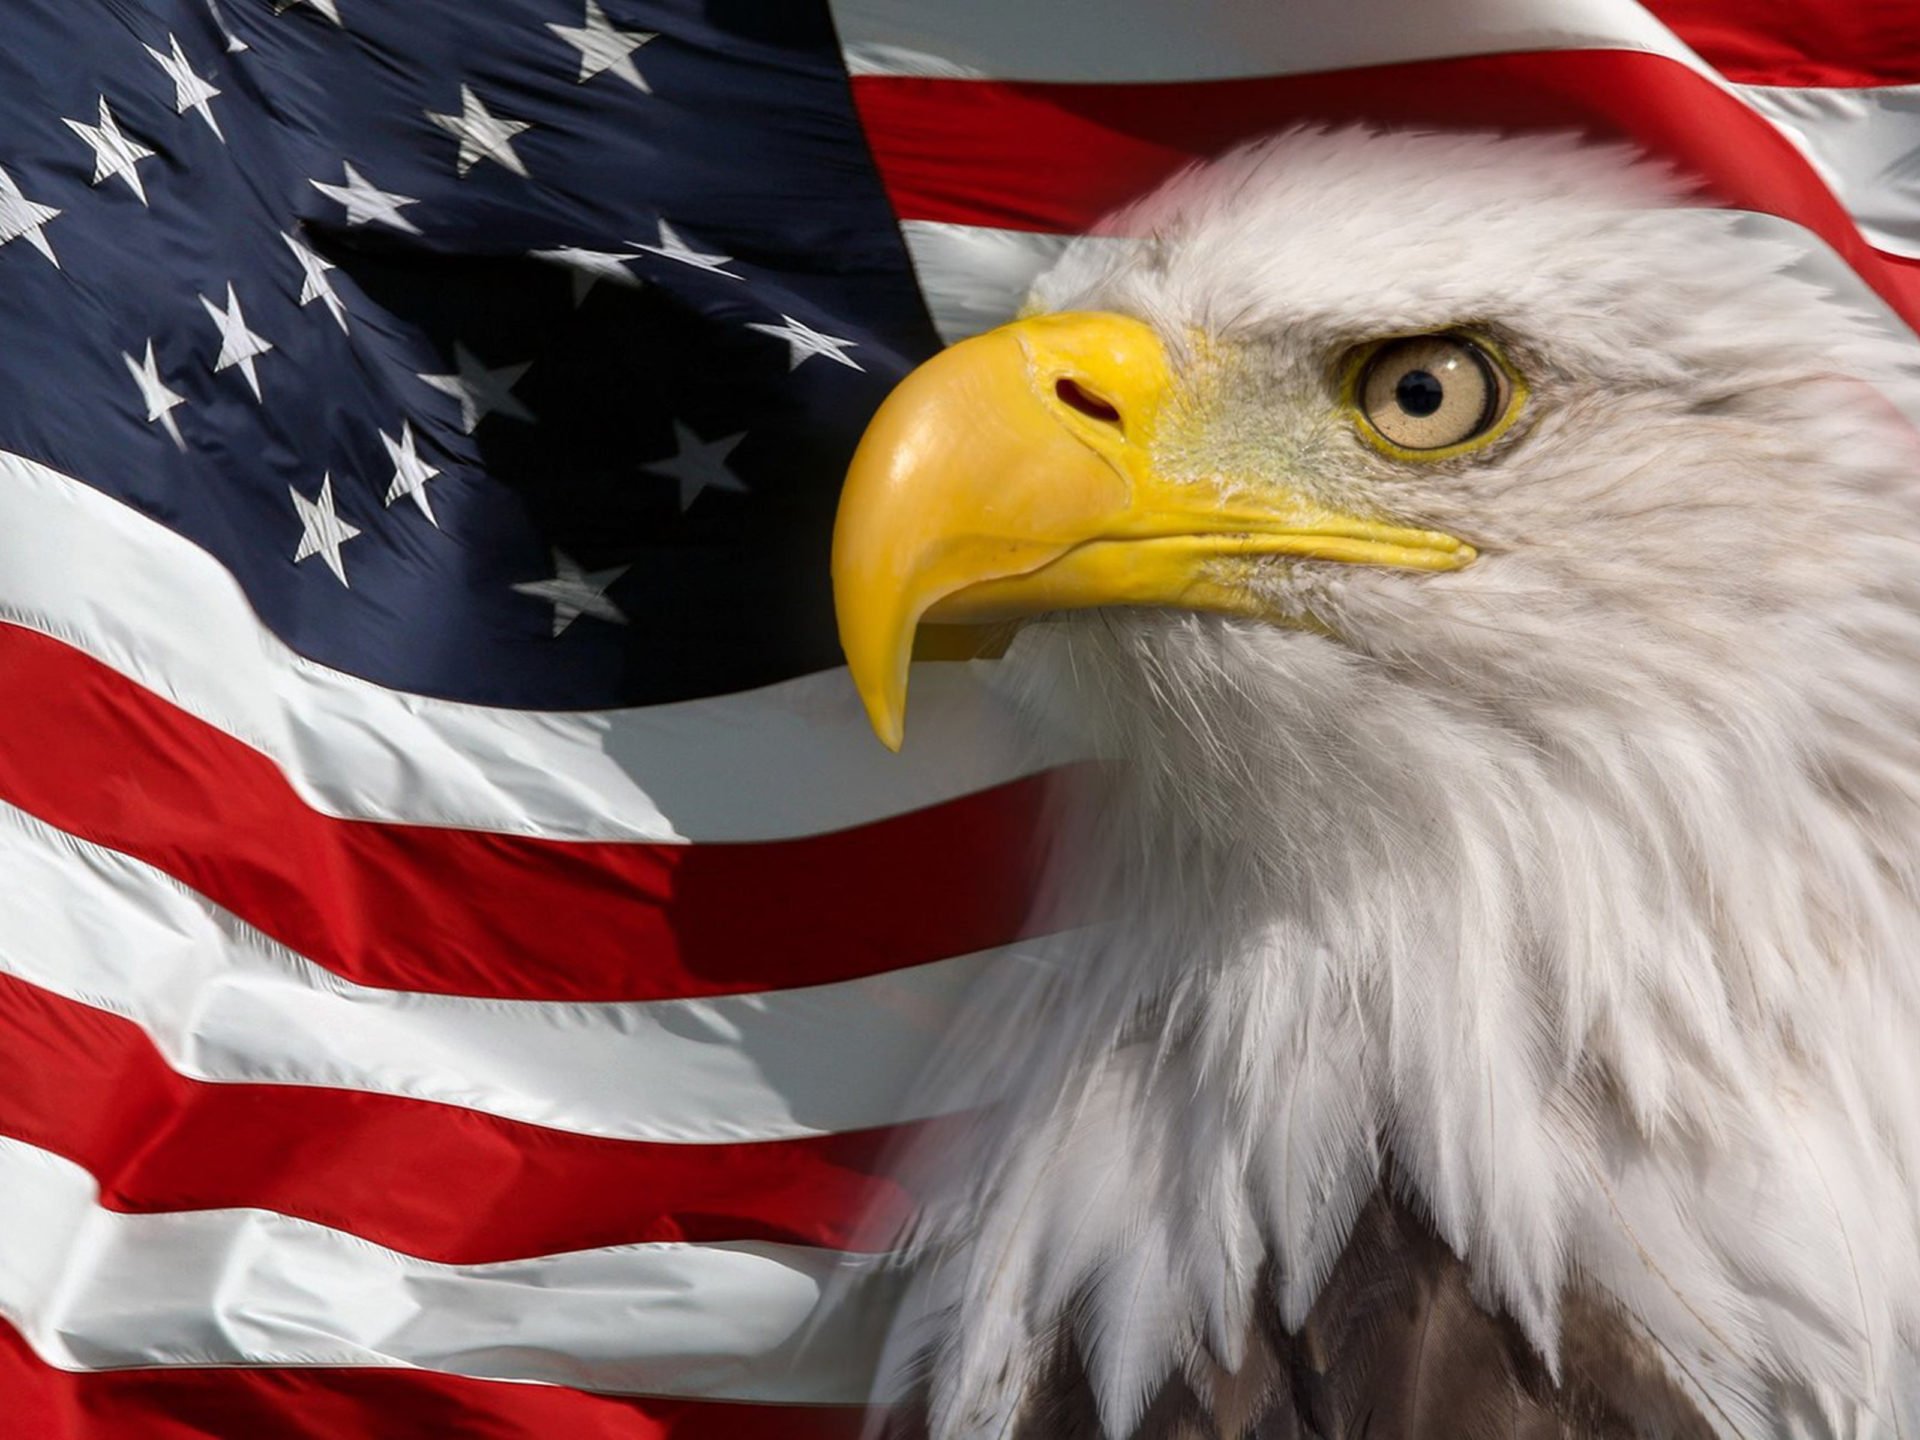 American Flag And Bald Eagle Symbol Of America Picture HD Wallpaper For Mobile Phones Tablet And Pc 3840x2400, Wallpaper13.com